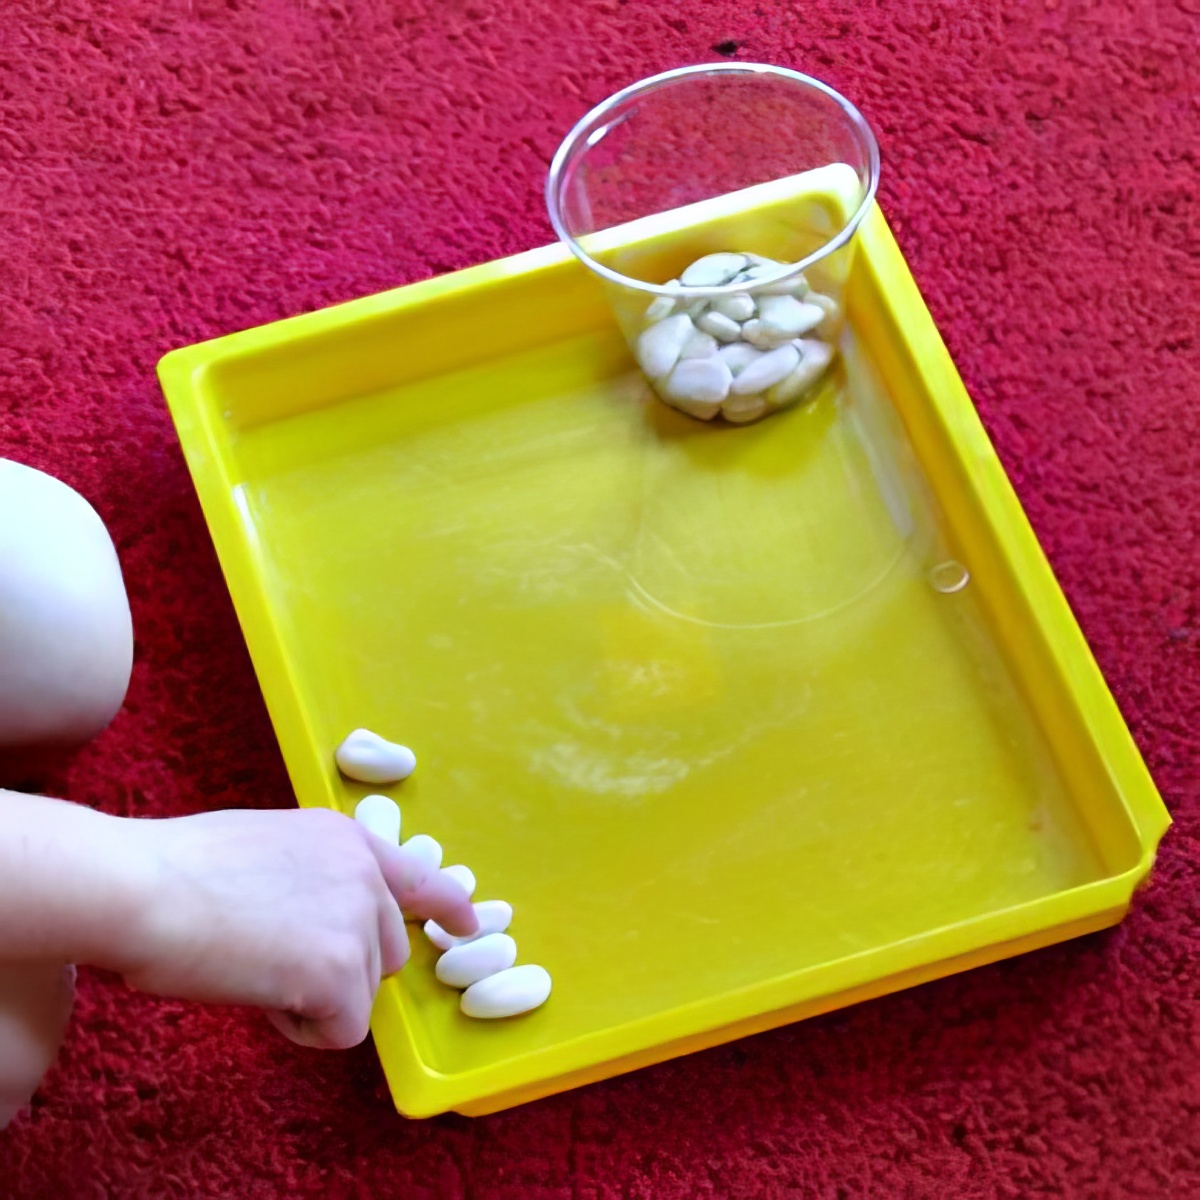 Seeds and pebbles for counting preschoolers